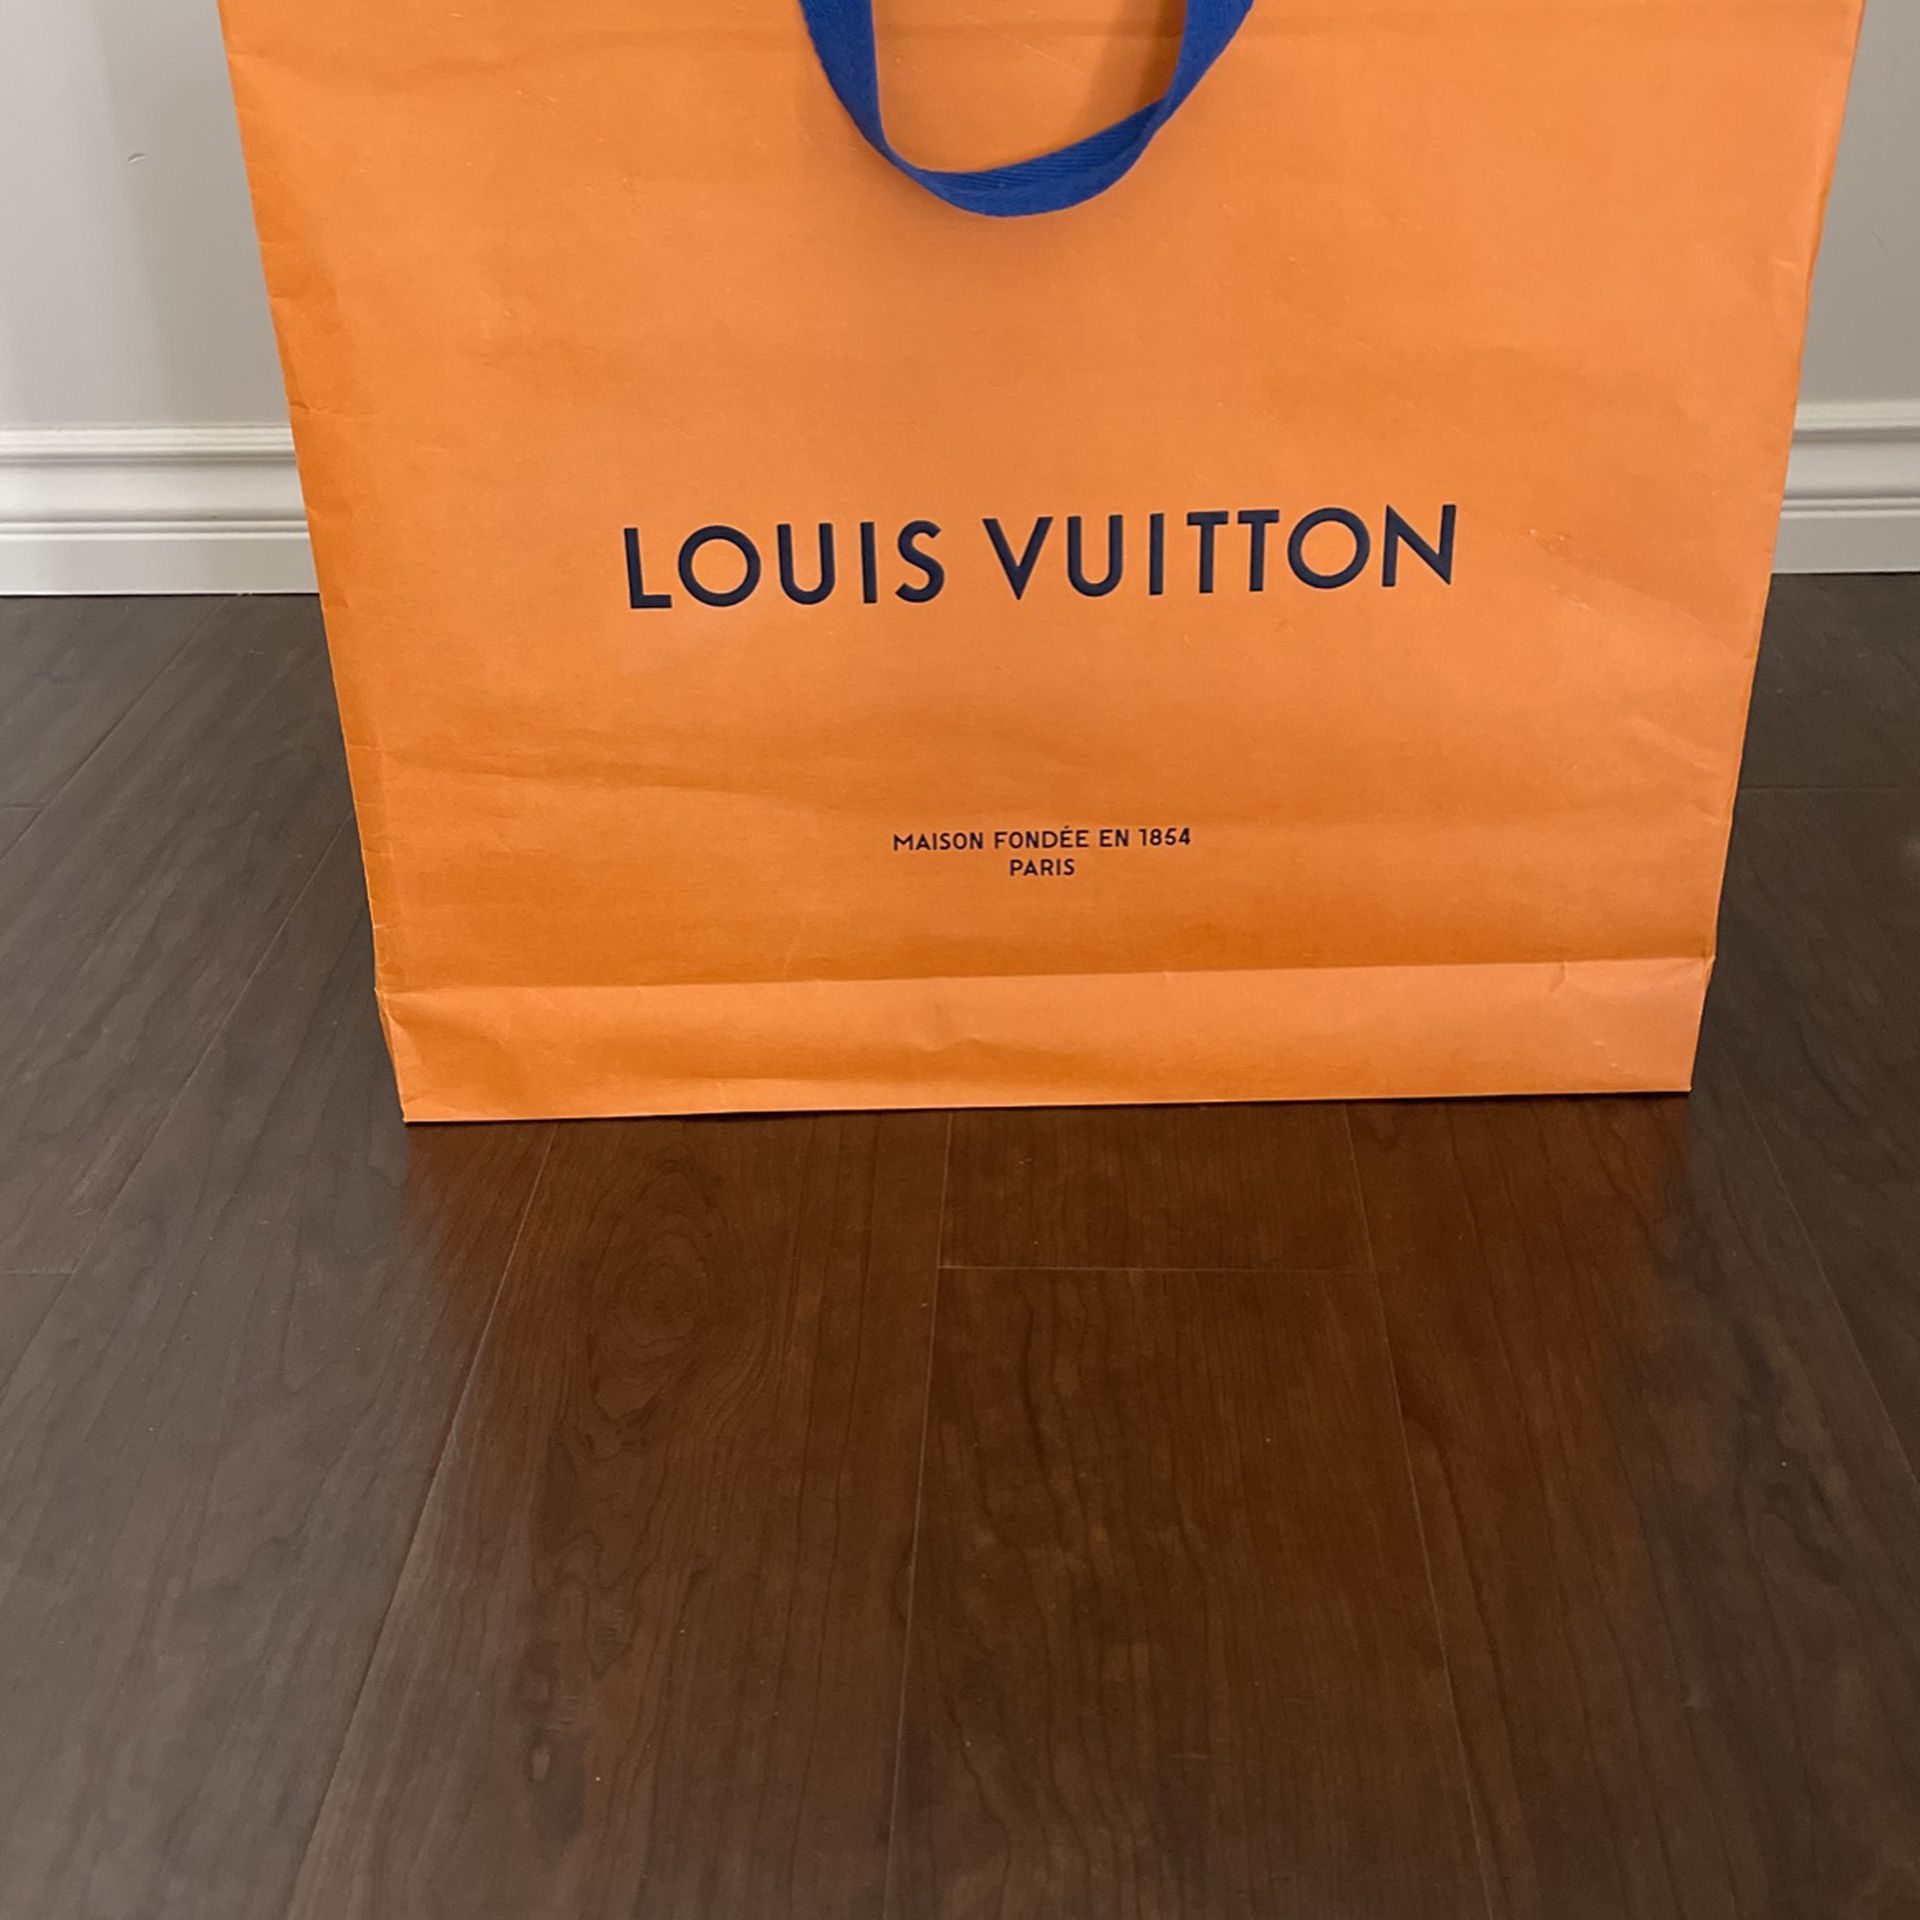 Empty Large LV Box With Bag for Sale in Perris, CA - OfferUp